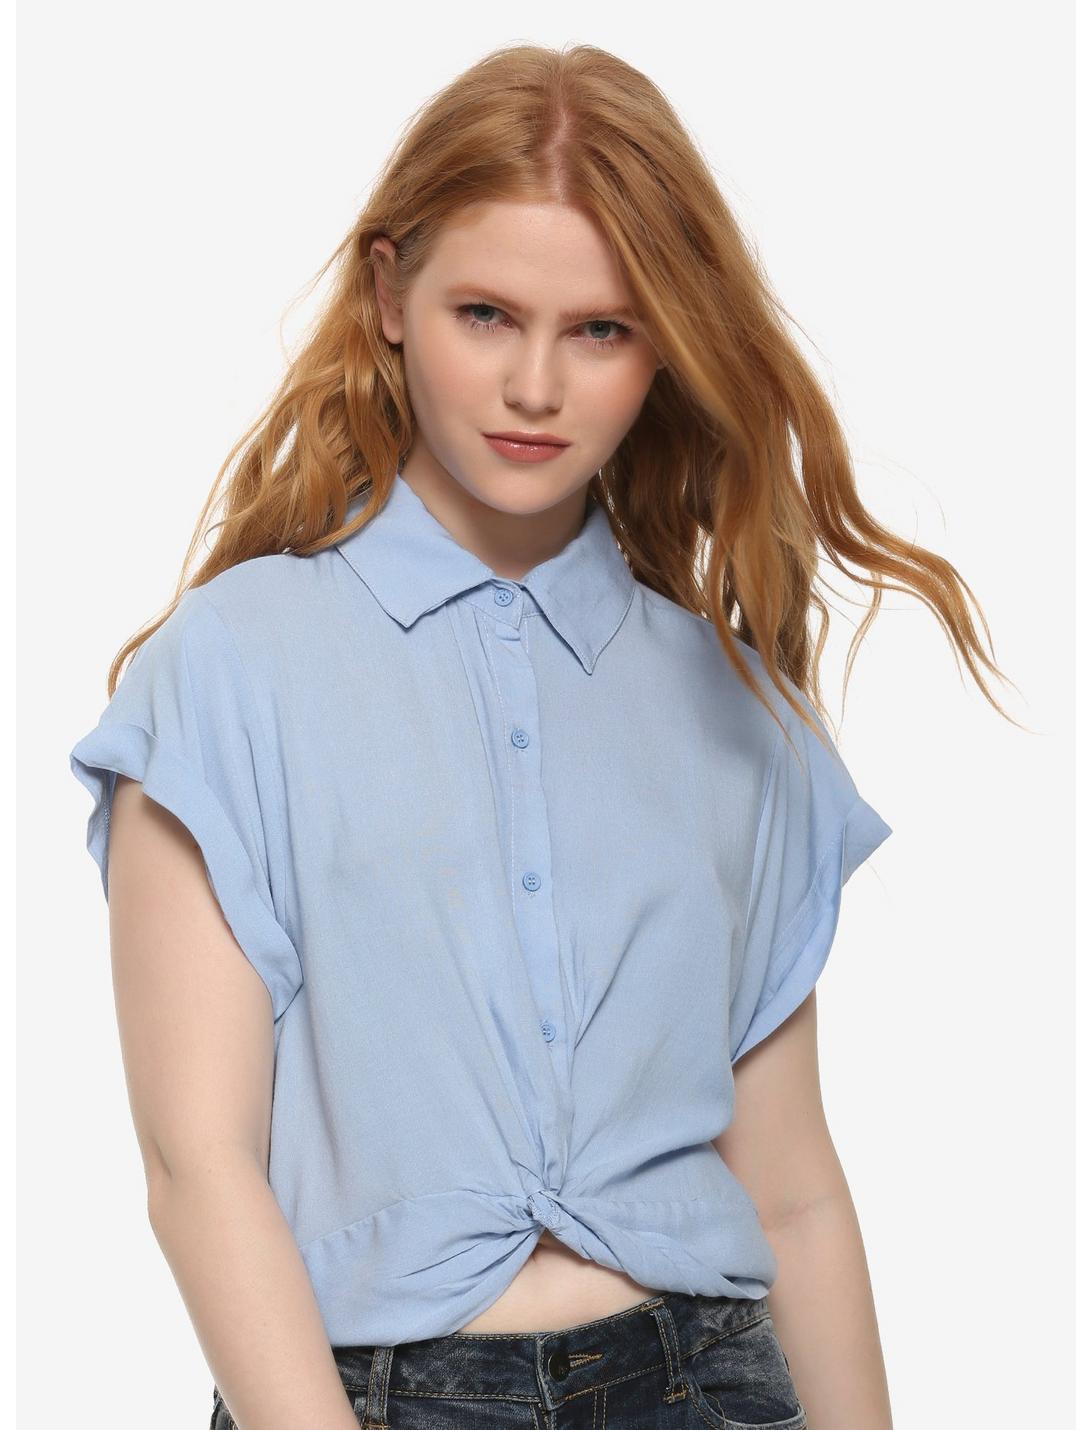 Chambray Twist Front Girls Button-Up Woven Top, CHAMBRAY, hi-res